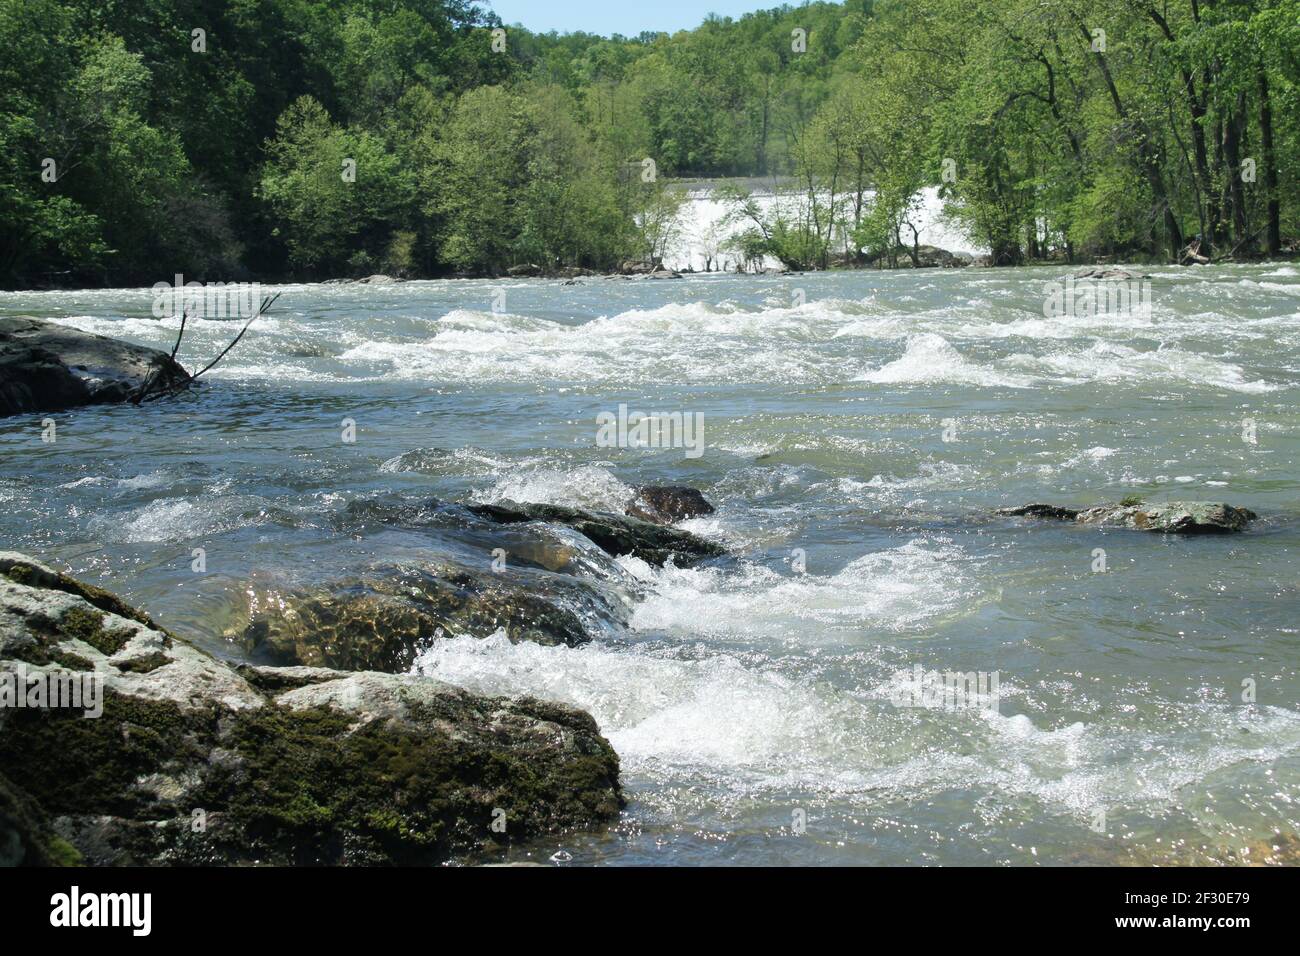 Blue Ridge Parkway, VA, USA. The waters of the Roanoke River just after passing over the Niagara Dam. Stock Photo